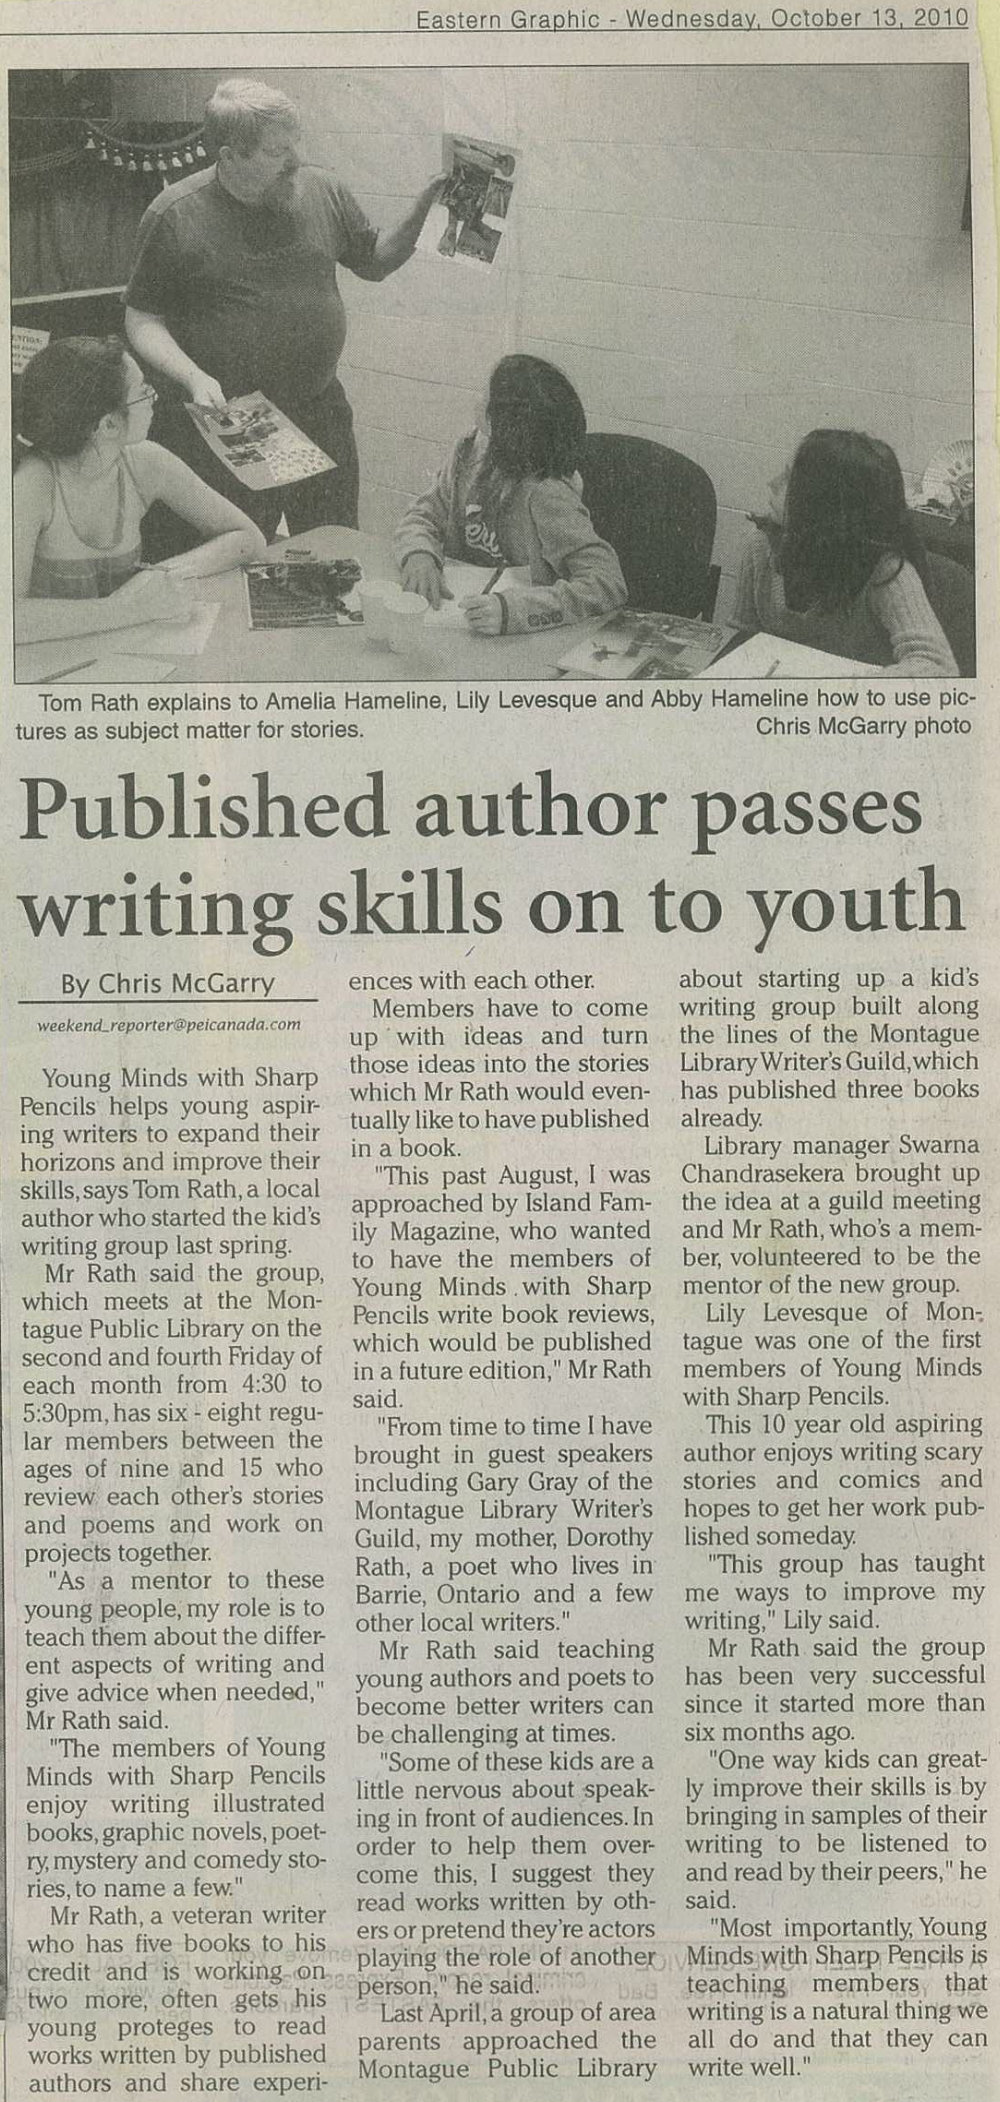 Published author passes writing skills on to youth